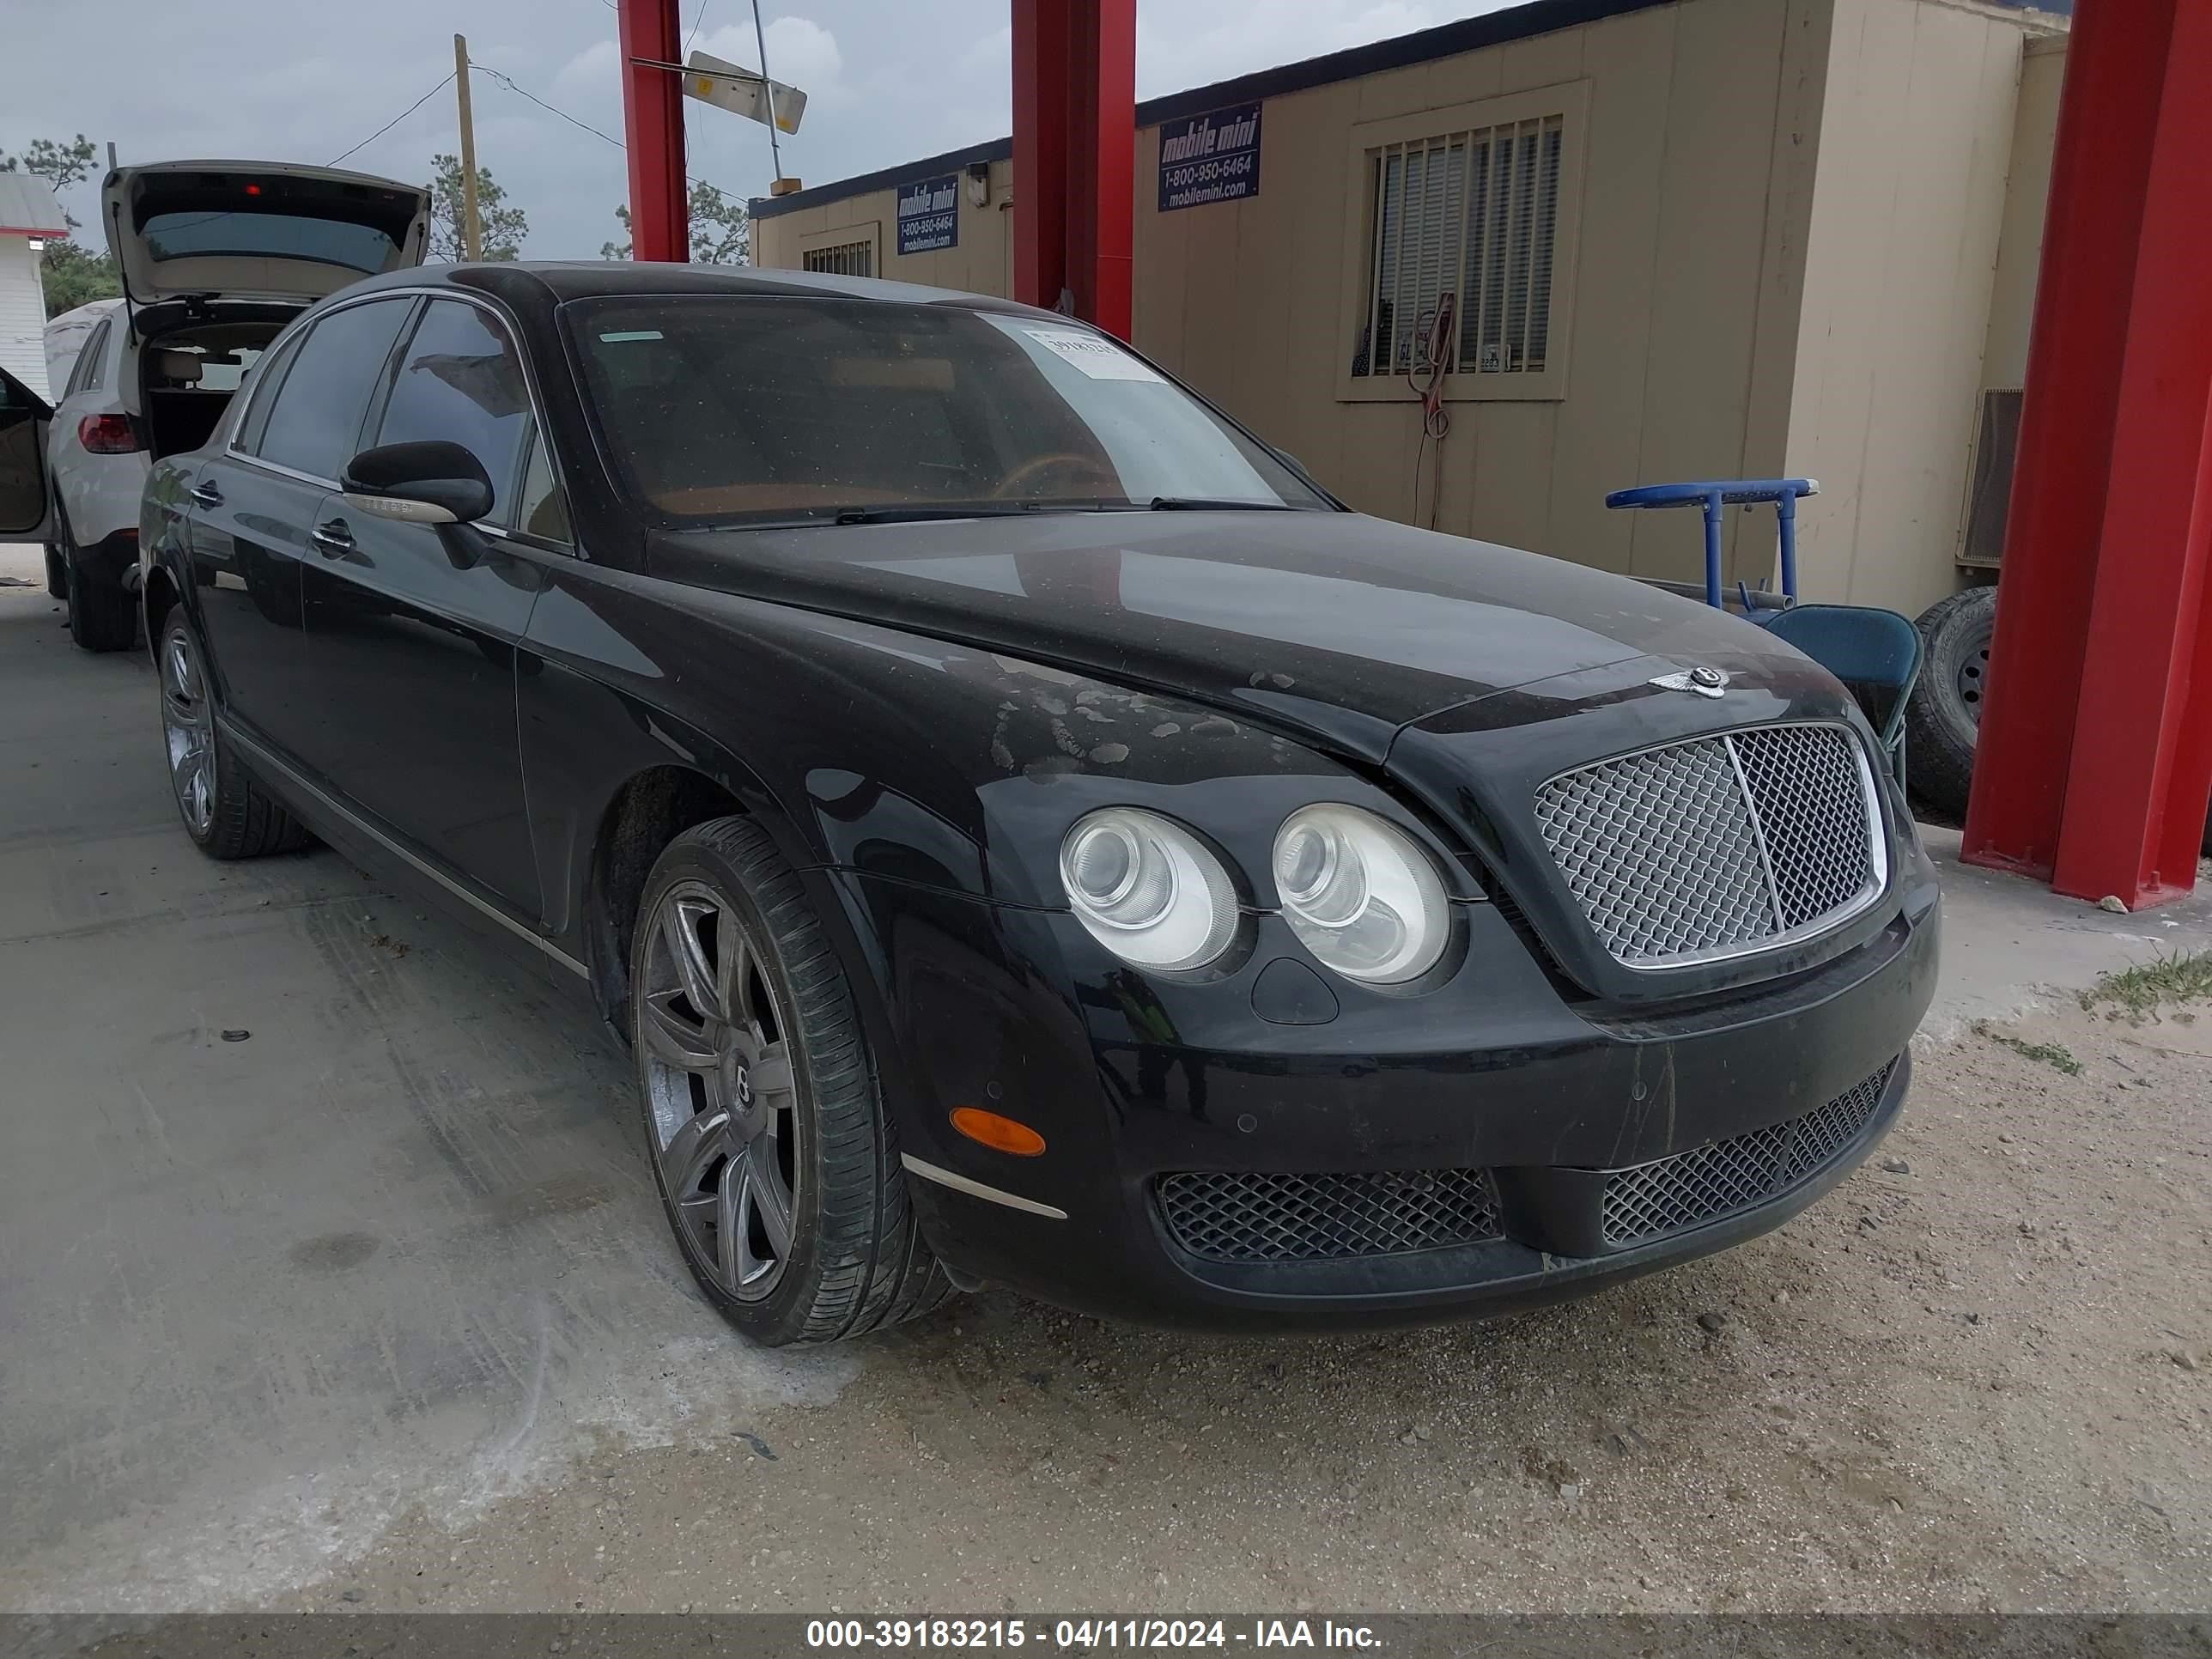 vin: SCBBR53W16C037340 SCBBR53W16C037340 2006 bentley continental flying spur 6000 for Sale in 33913, 11950 Fl-82, Fort Myers, Florida, USA